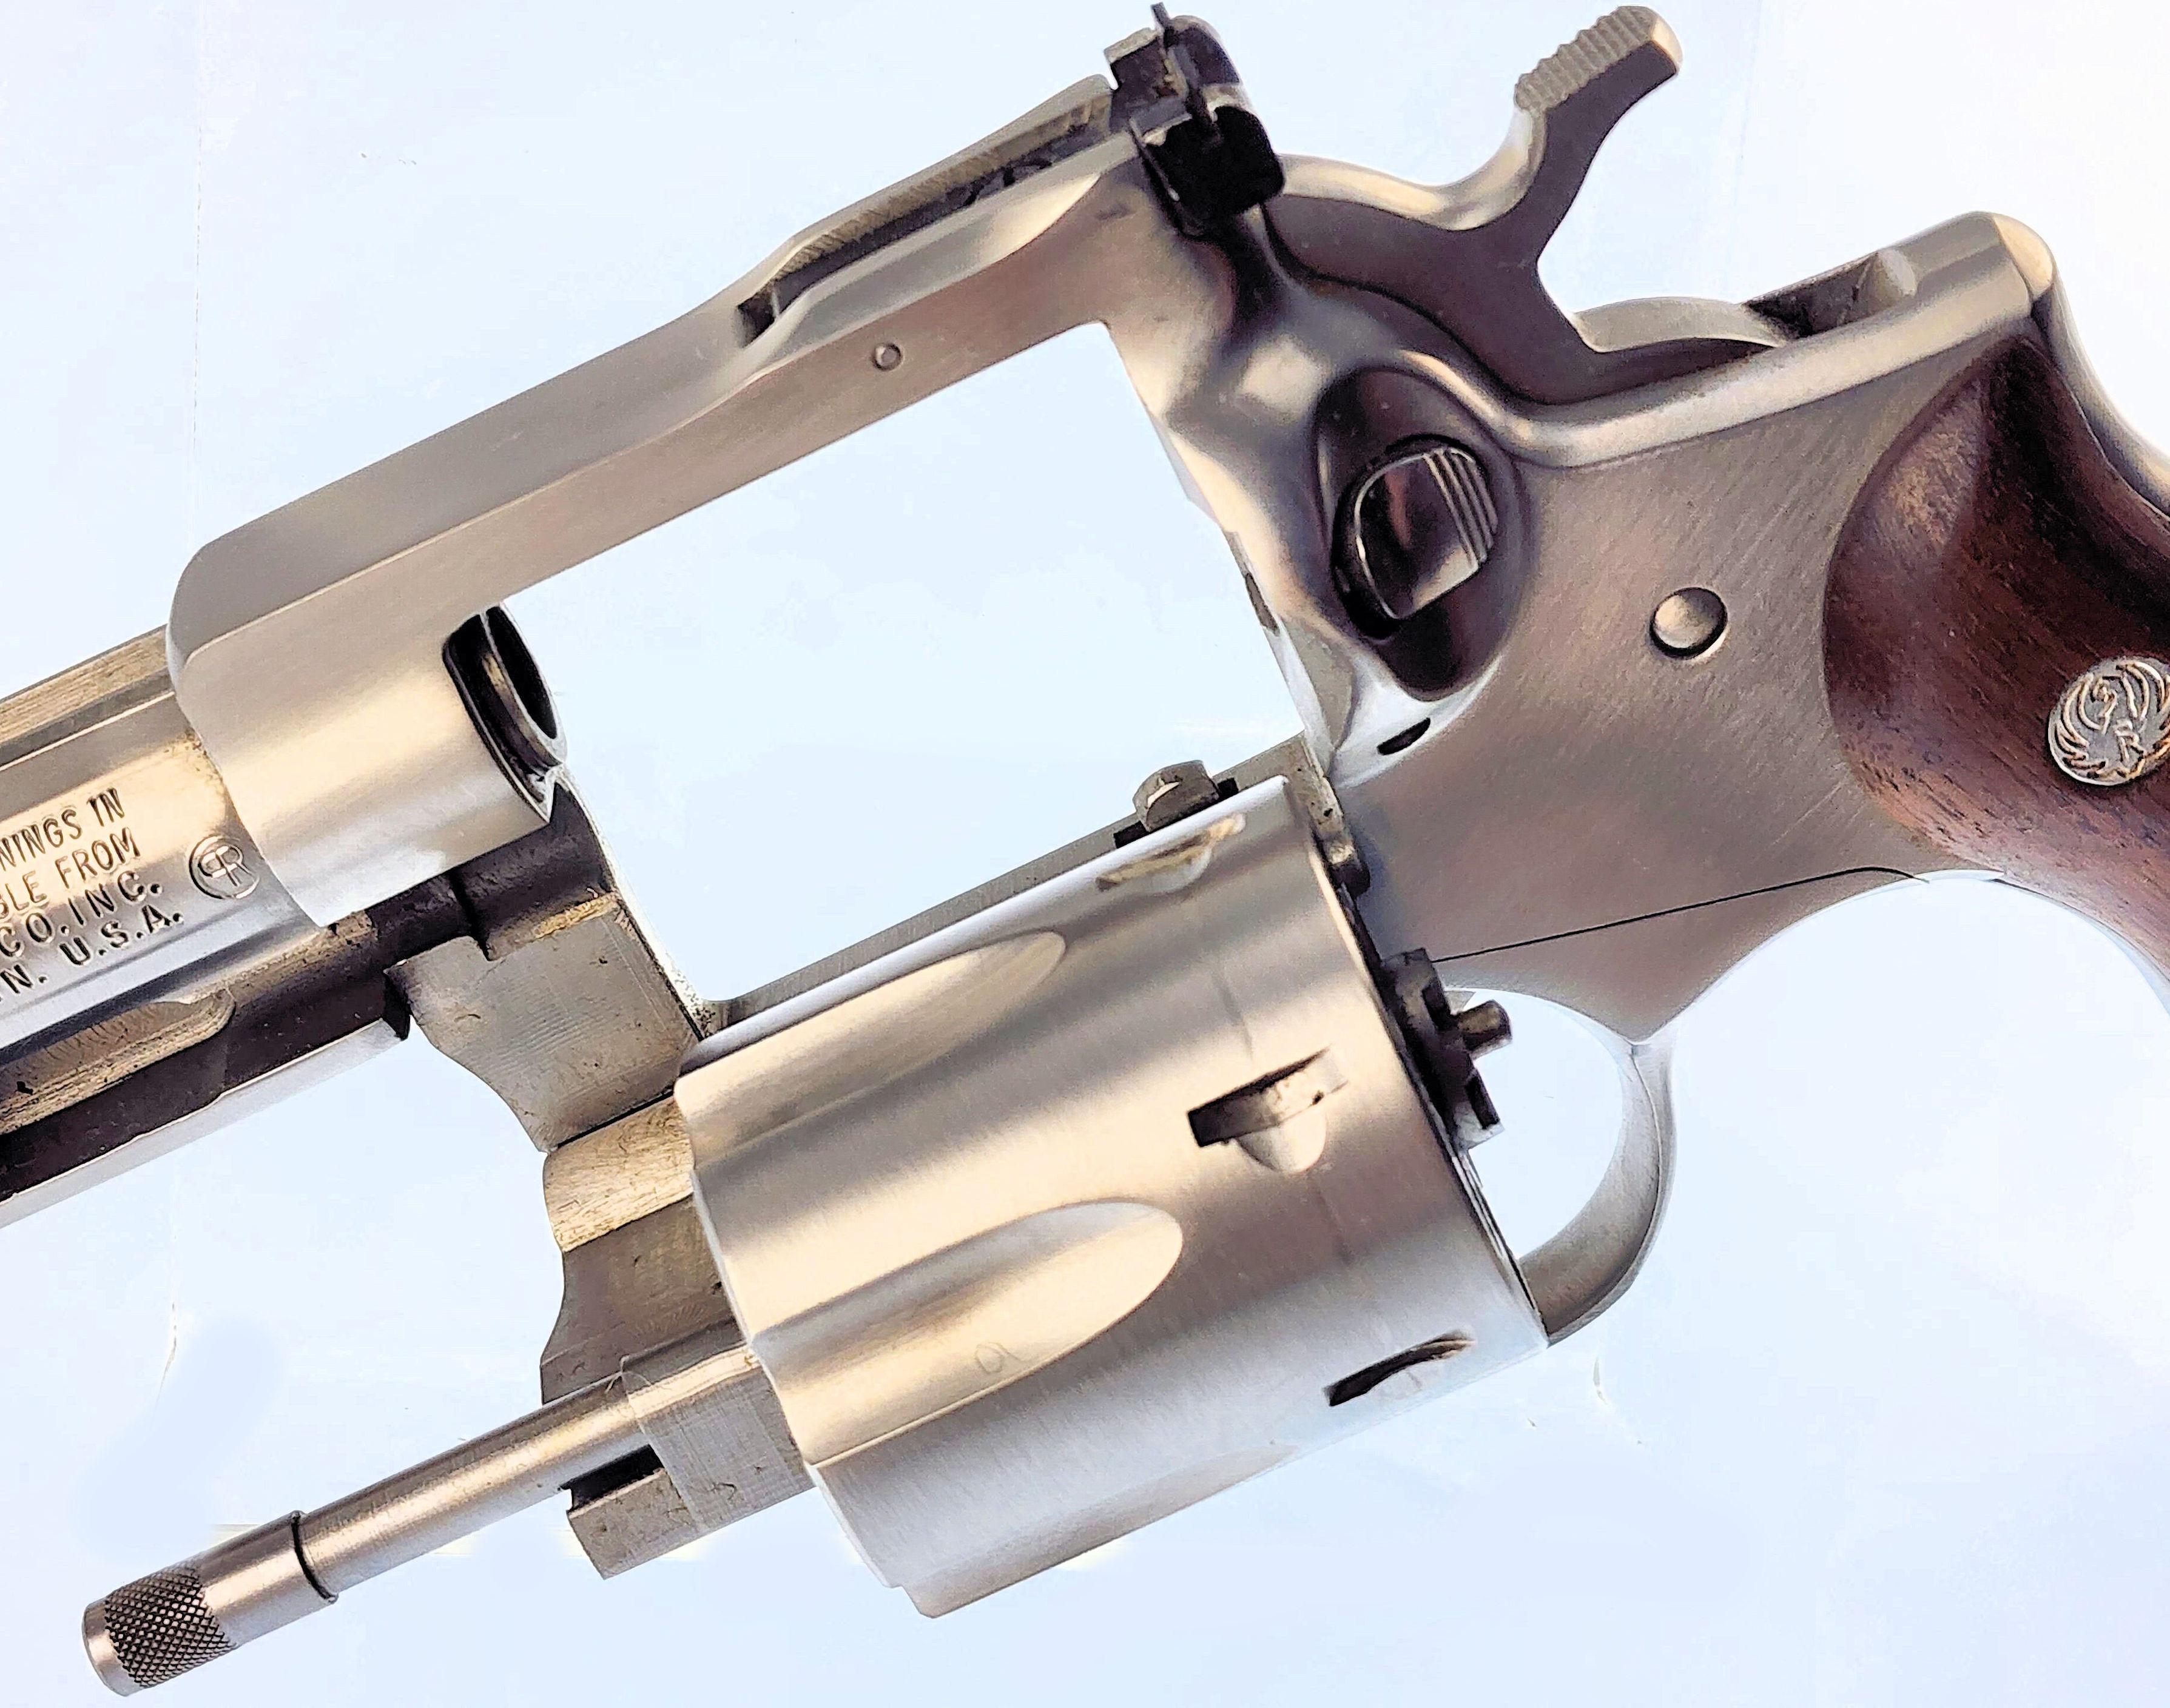 Sturm, Ruger & Co., Inc Security Six Mdl 717 Double Action Revolver